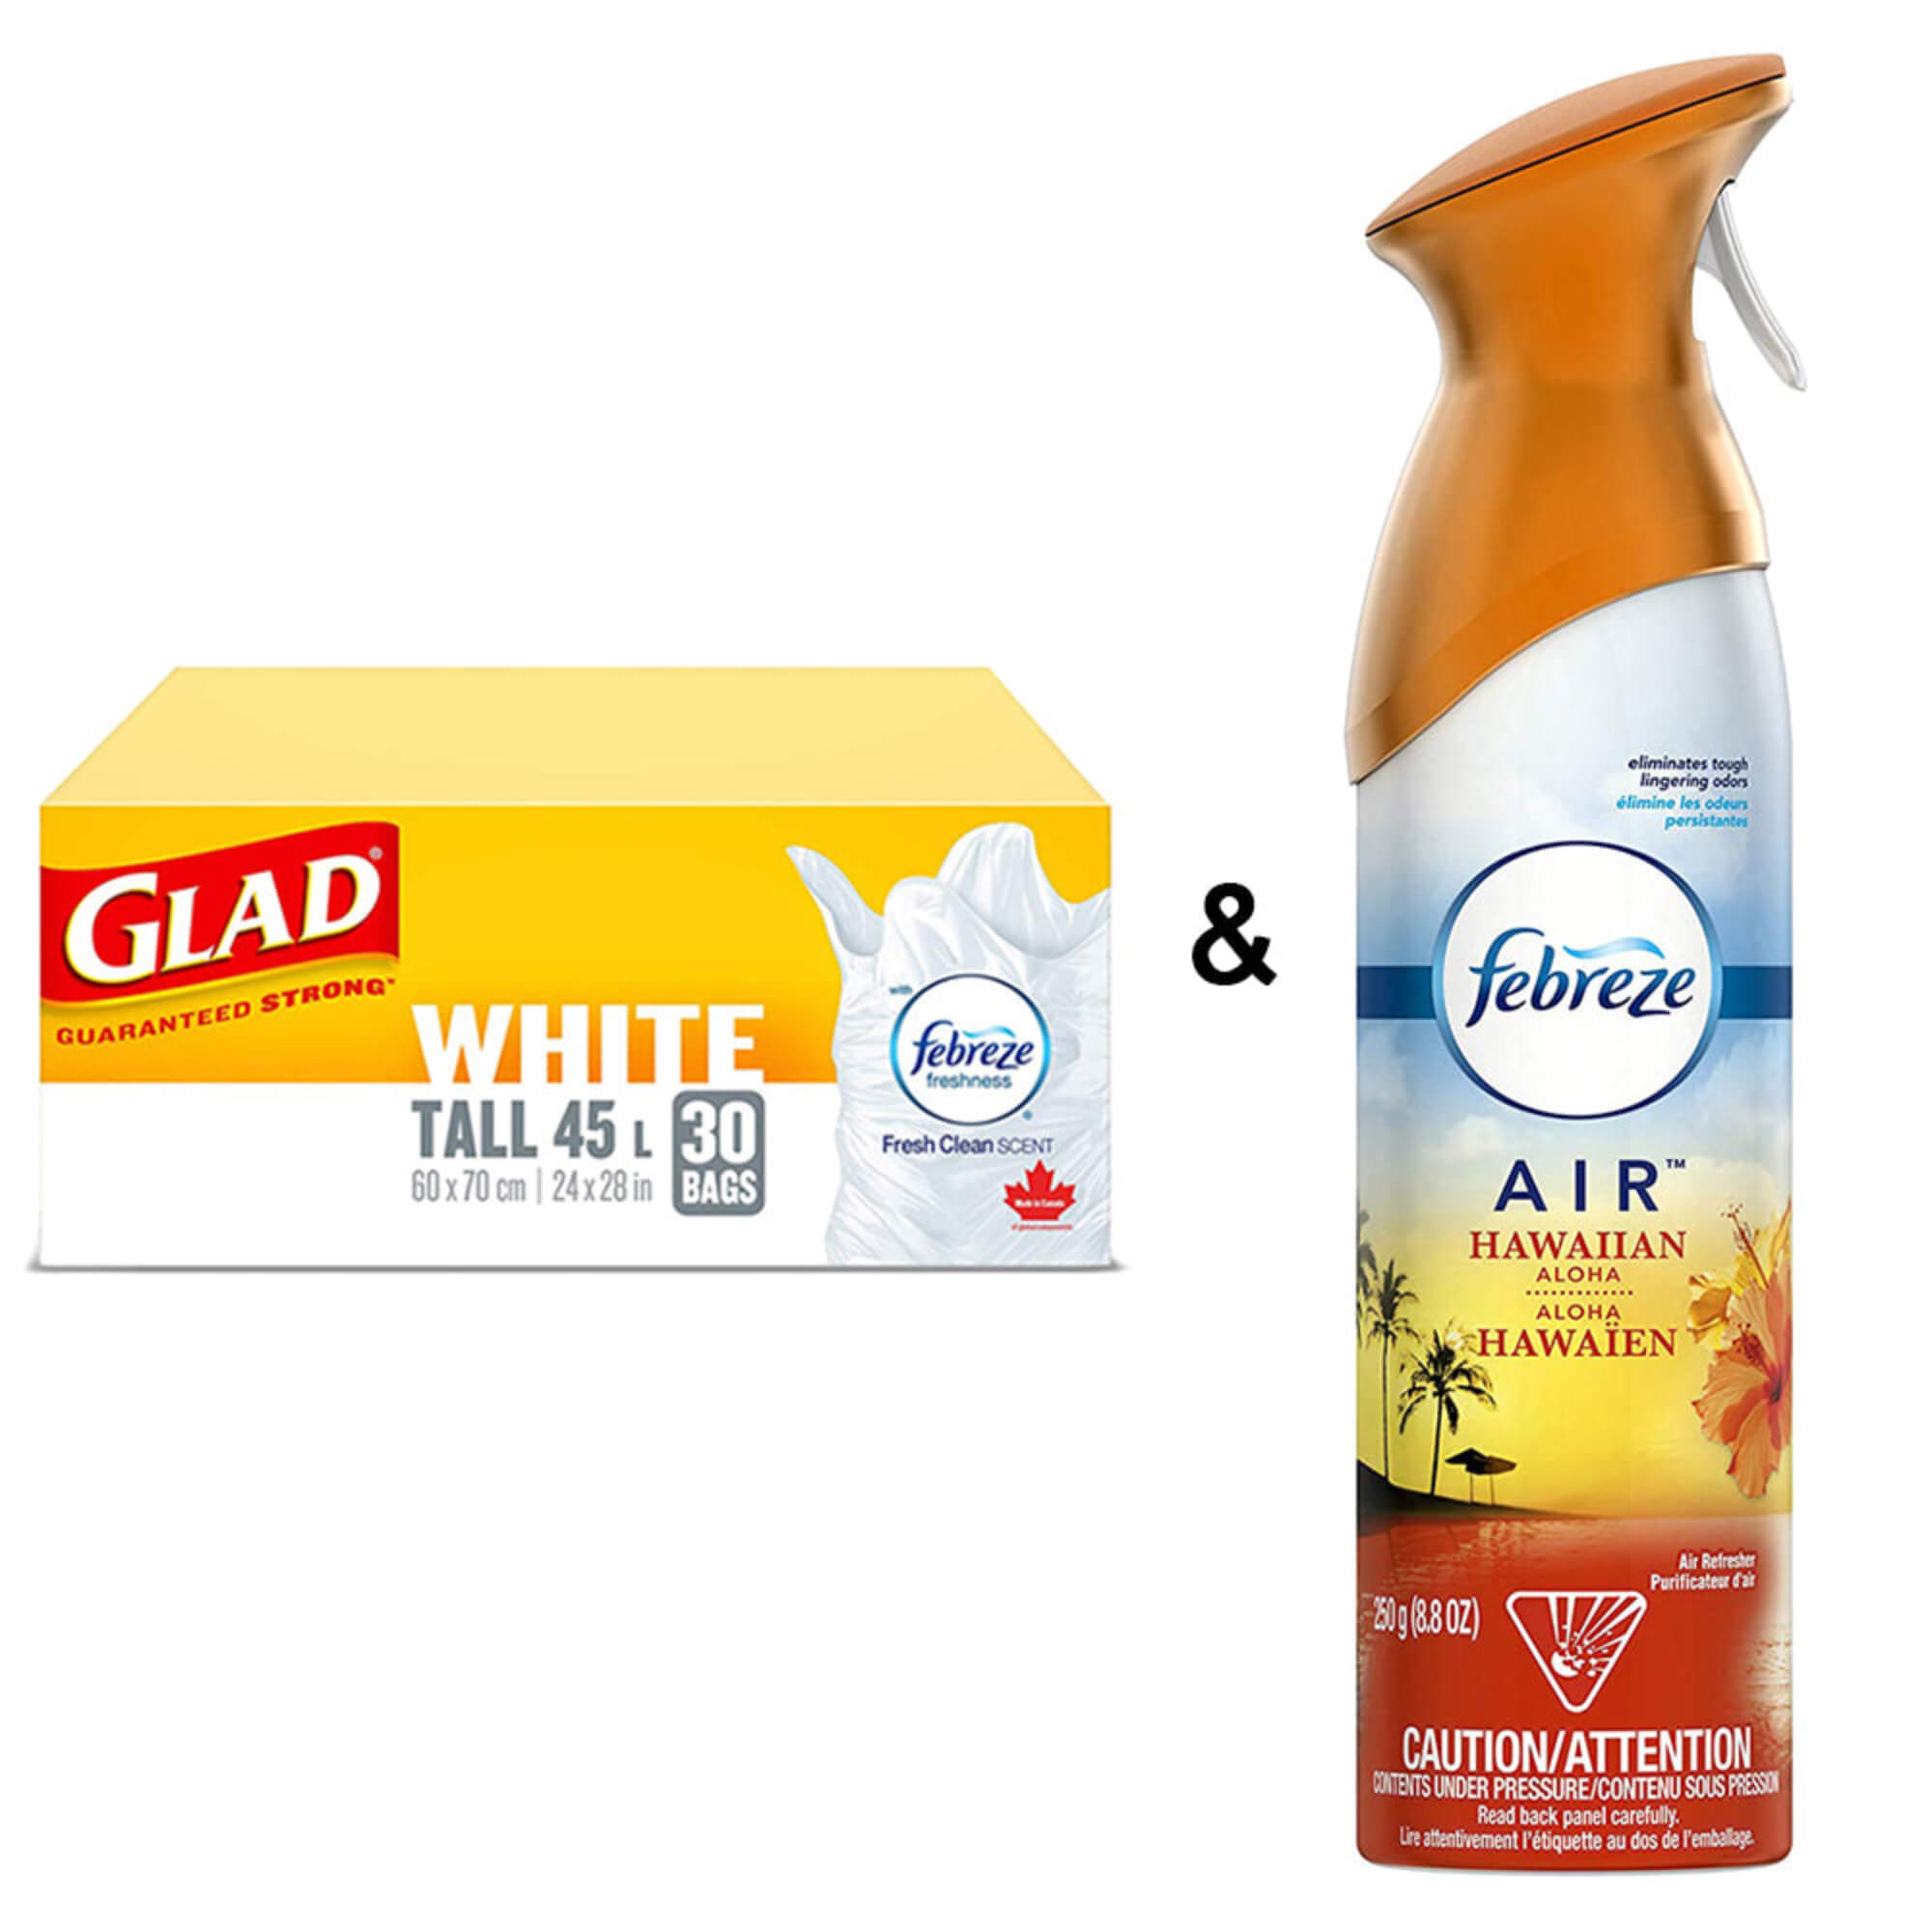 Air Freshener & Glad White Garbage - Tall 45 Ltr - 30 Bags